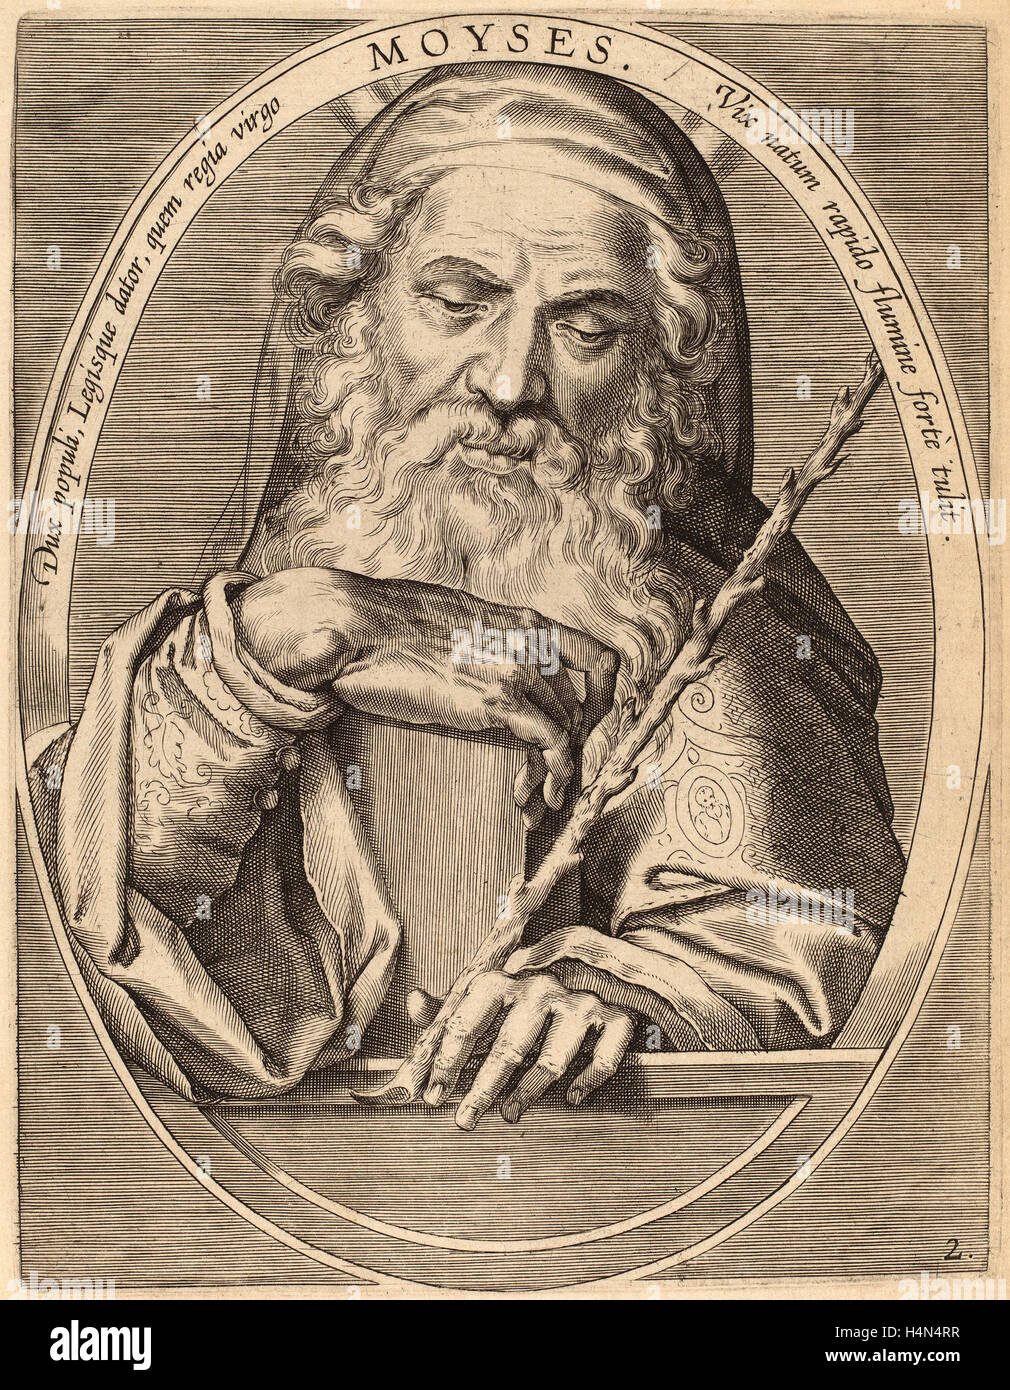 Theodor Galle after Jan van der Straet (Flemish, c. 1571 - 1633), Moses, published 1613, engraving on laid paper Stock Photo